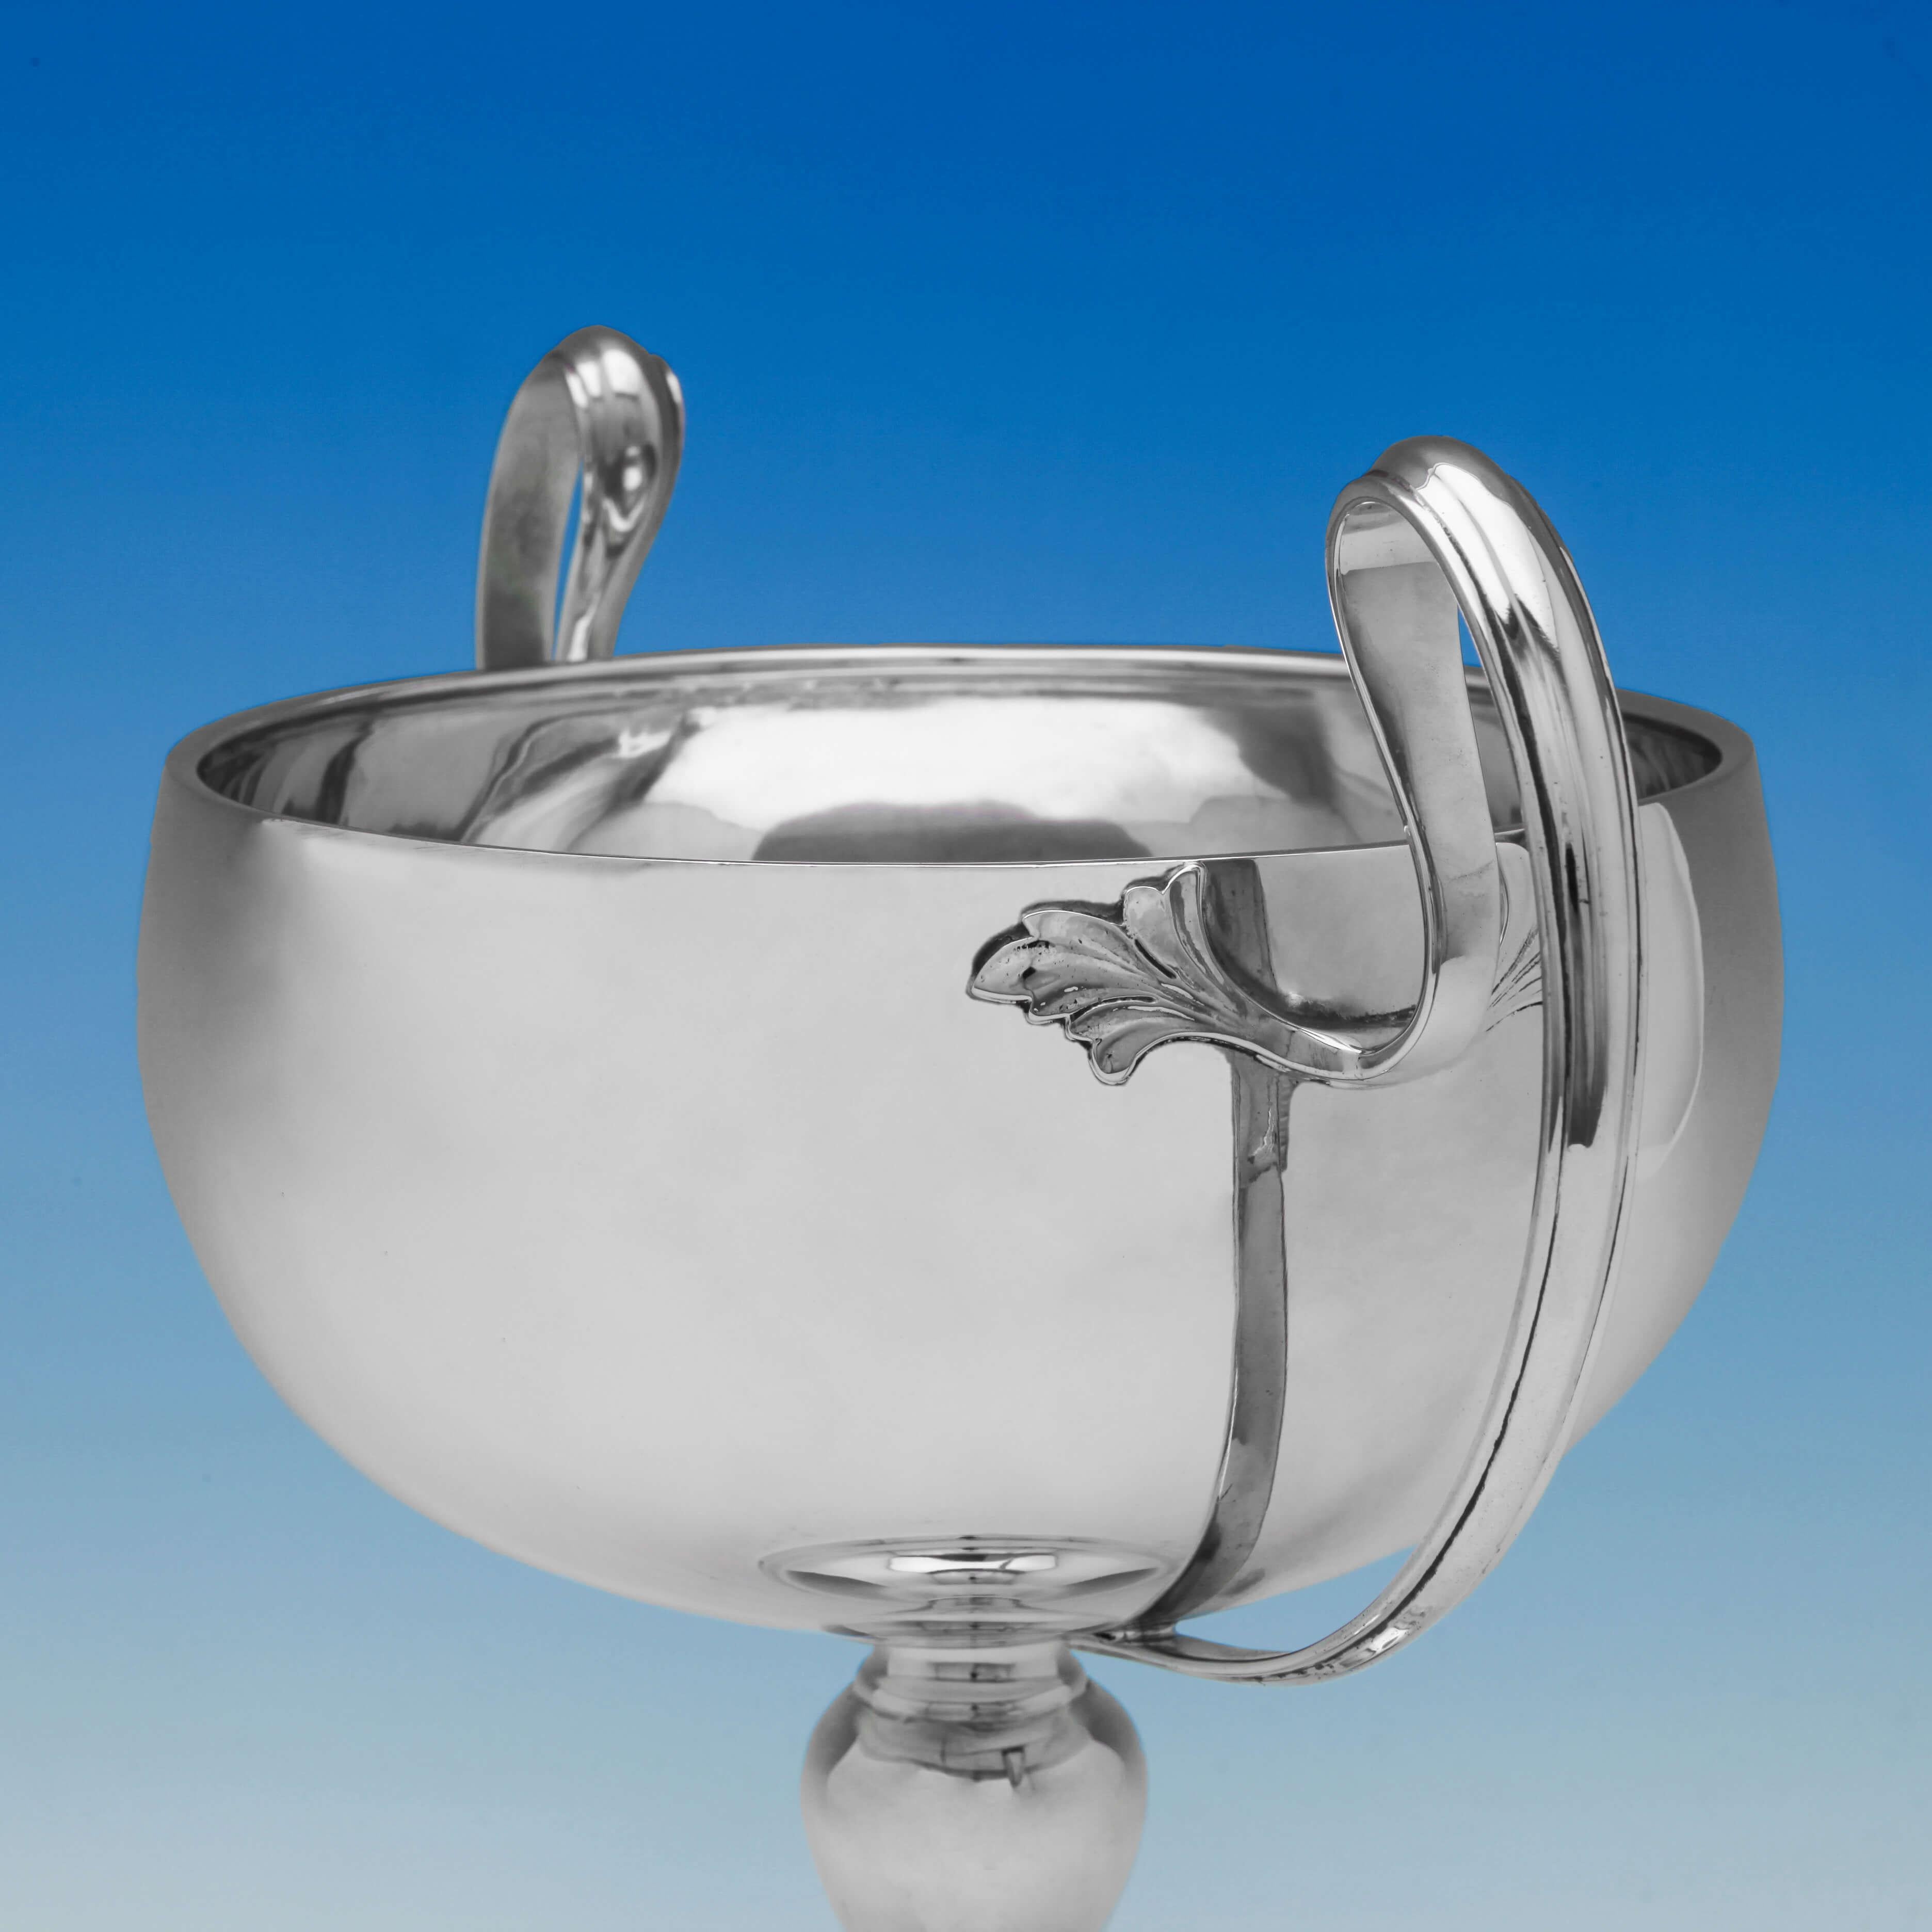 Hallmarked in London, 1926 by H. Phillips, this attractive, Art Nouveau, Sterling Silver Trophy, has a sleek and elegant style, with a plain body and loop handles. The cup measures 11